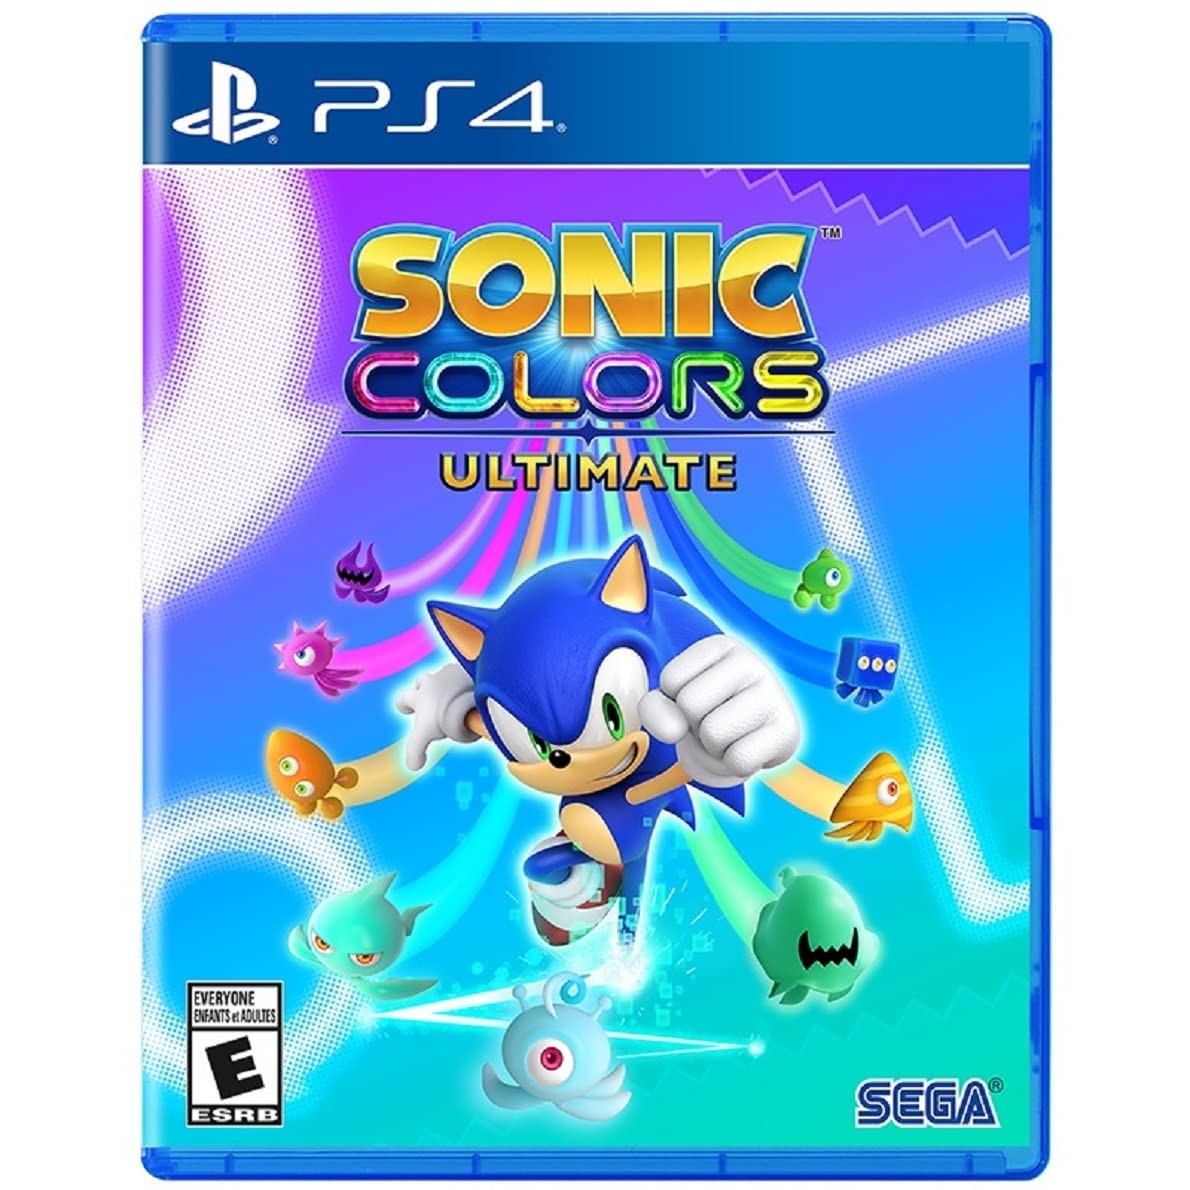  Sonic Colors Ultimate  PS4